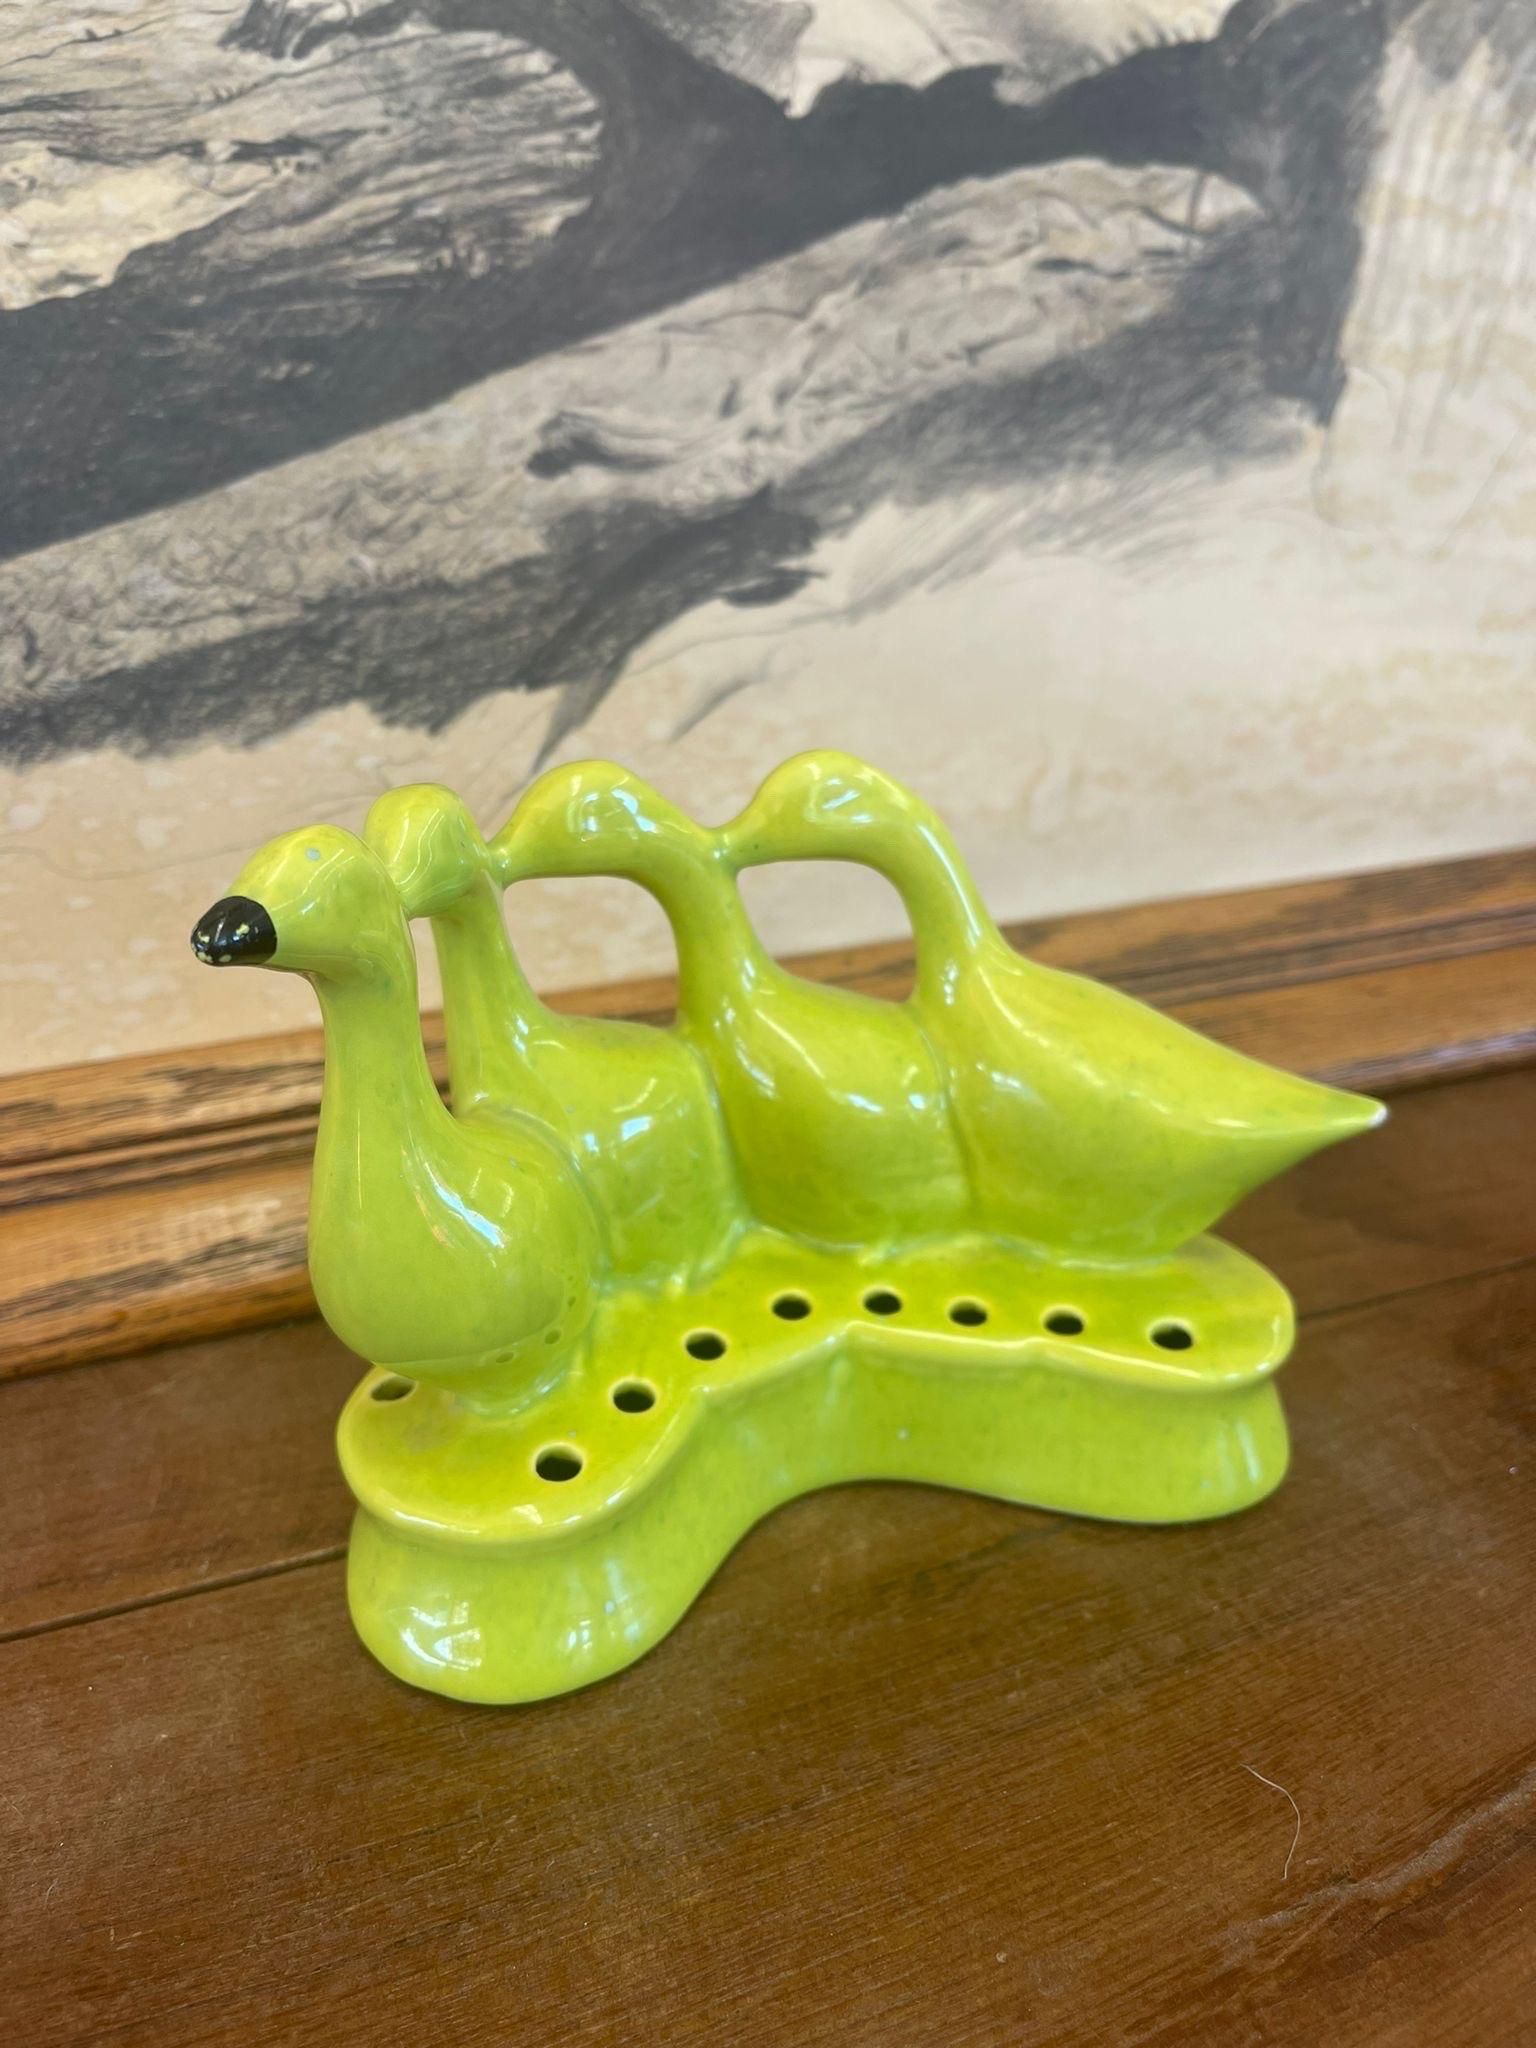 This Piece Features a Sculpture of  4 Ducks Walking ina Line. Bottom is Completely Sealed , Ready for Stems. Lime Green Color.

Dimensions. 7 W ; 4 D ; 5 H